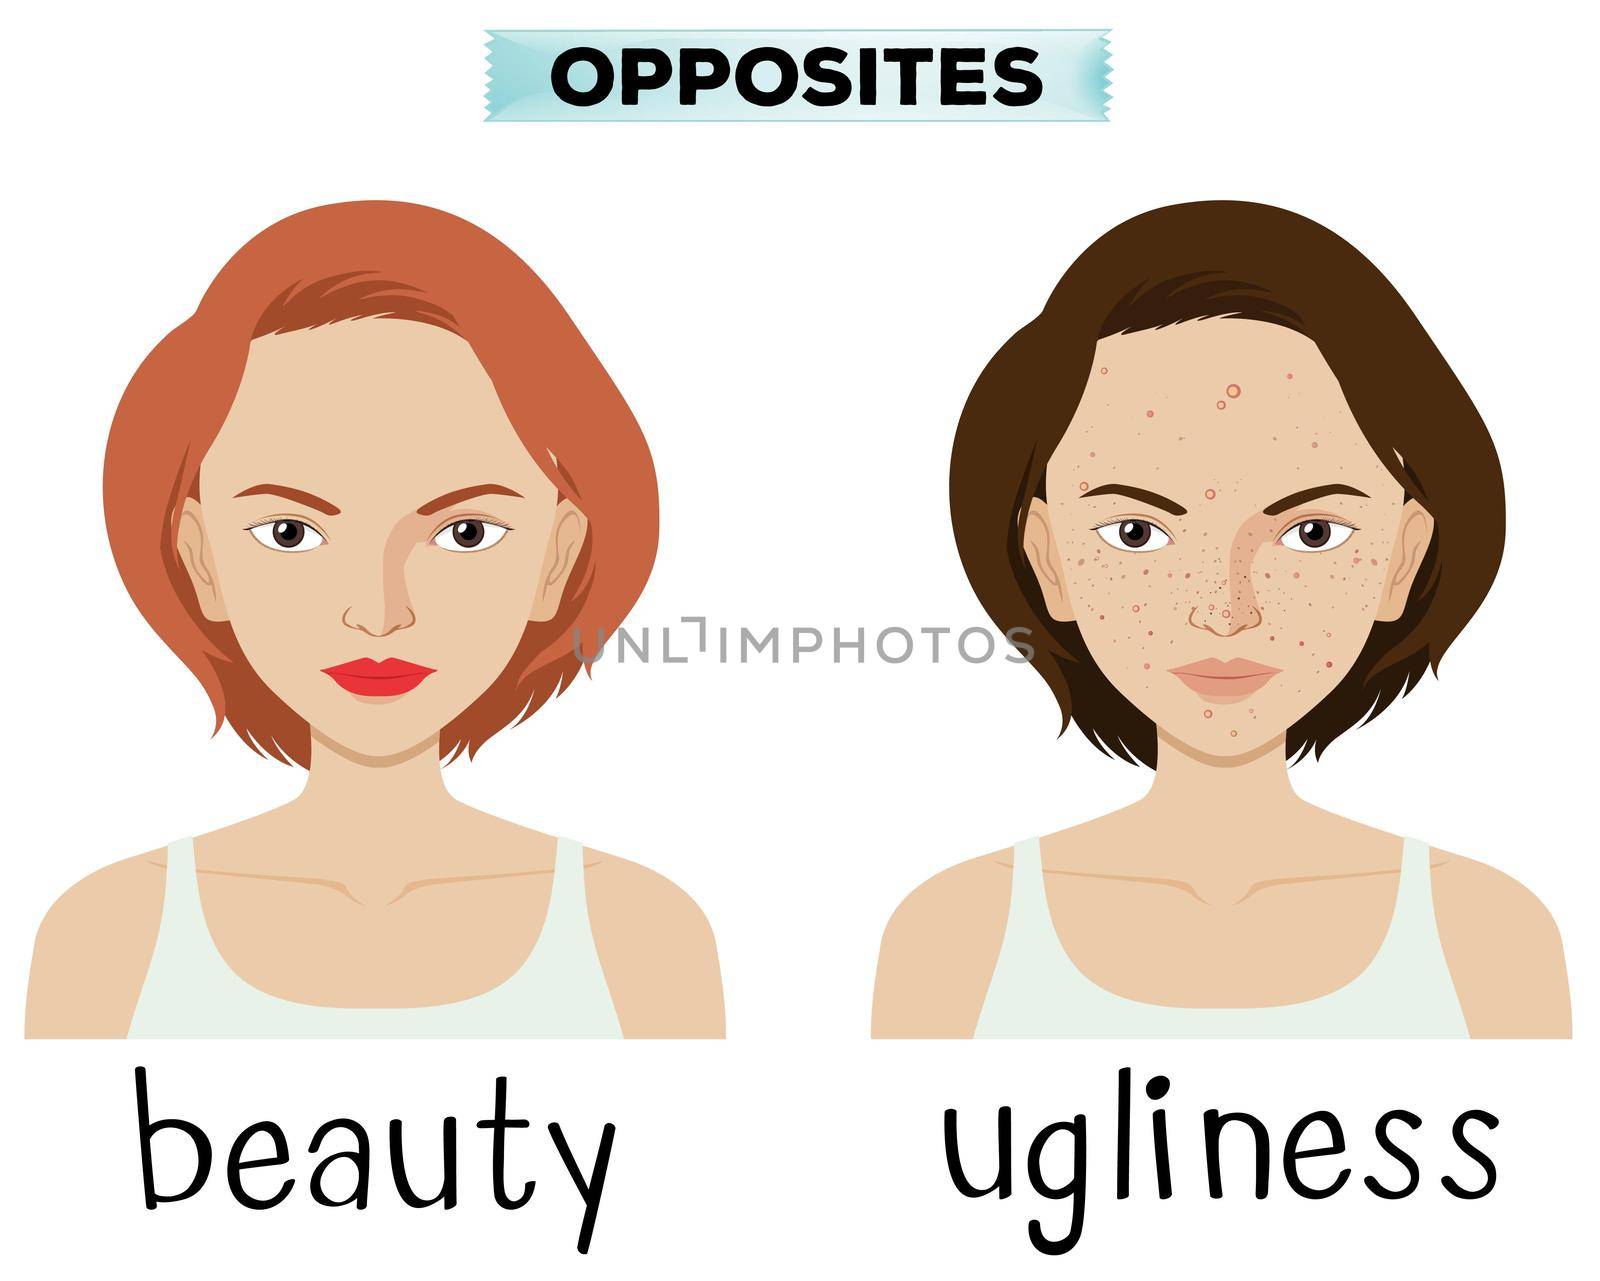 Opposite words for beauty and ugliness by iimages